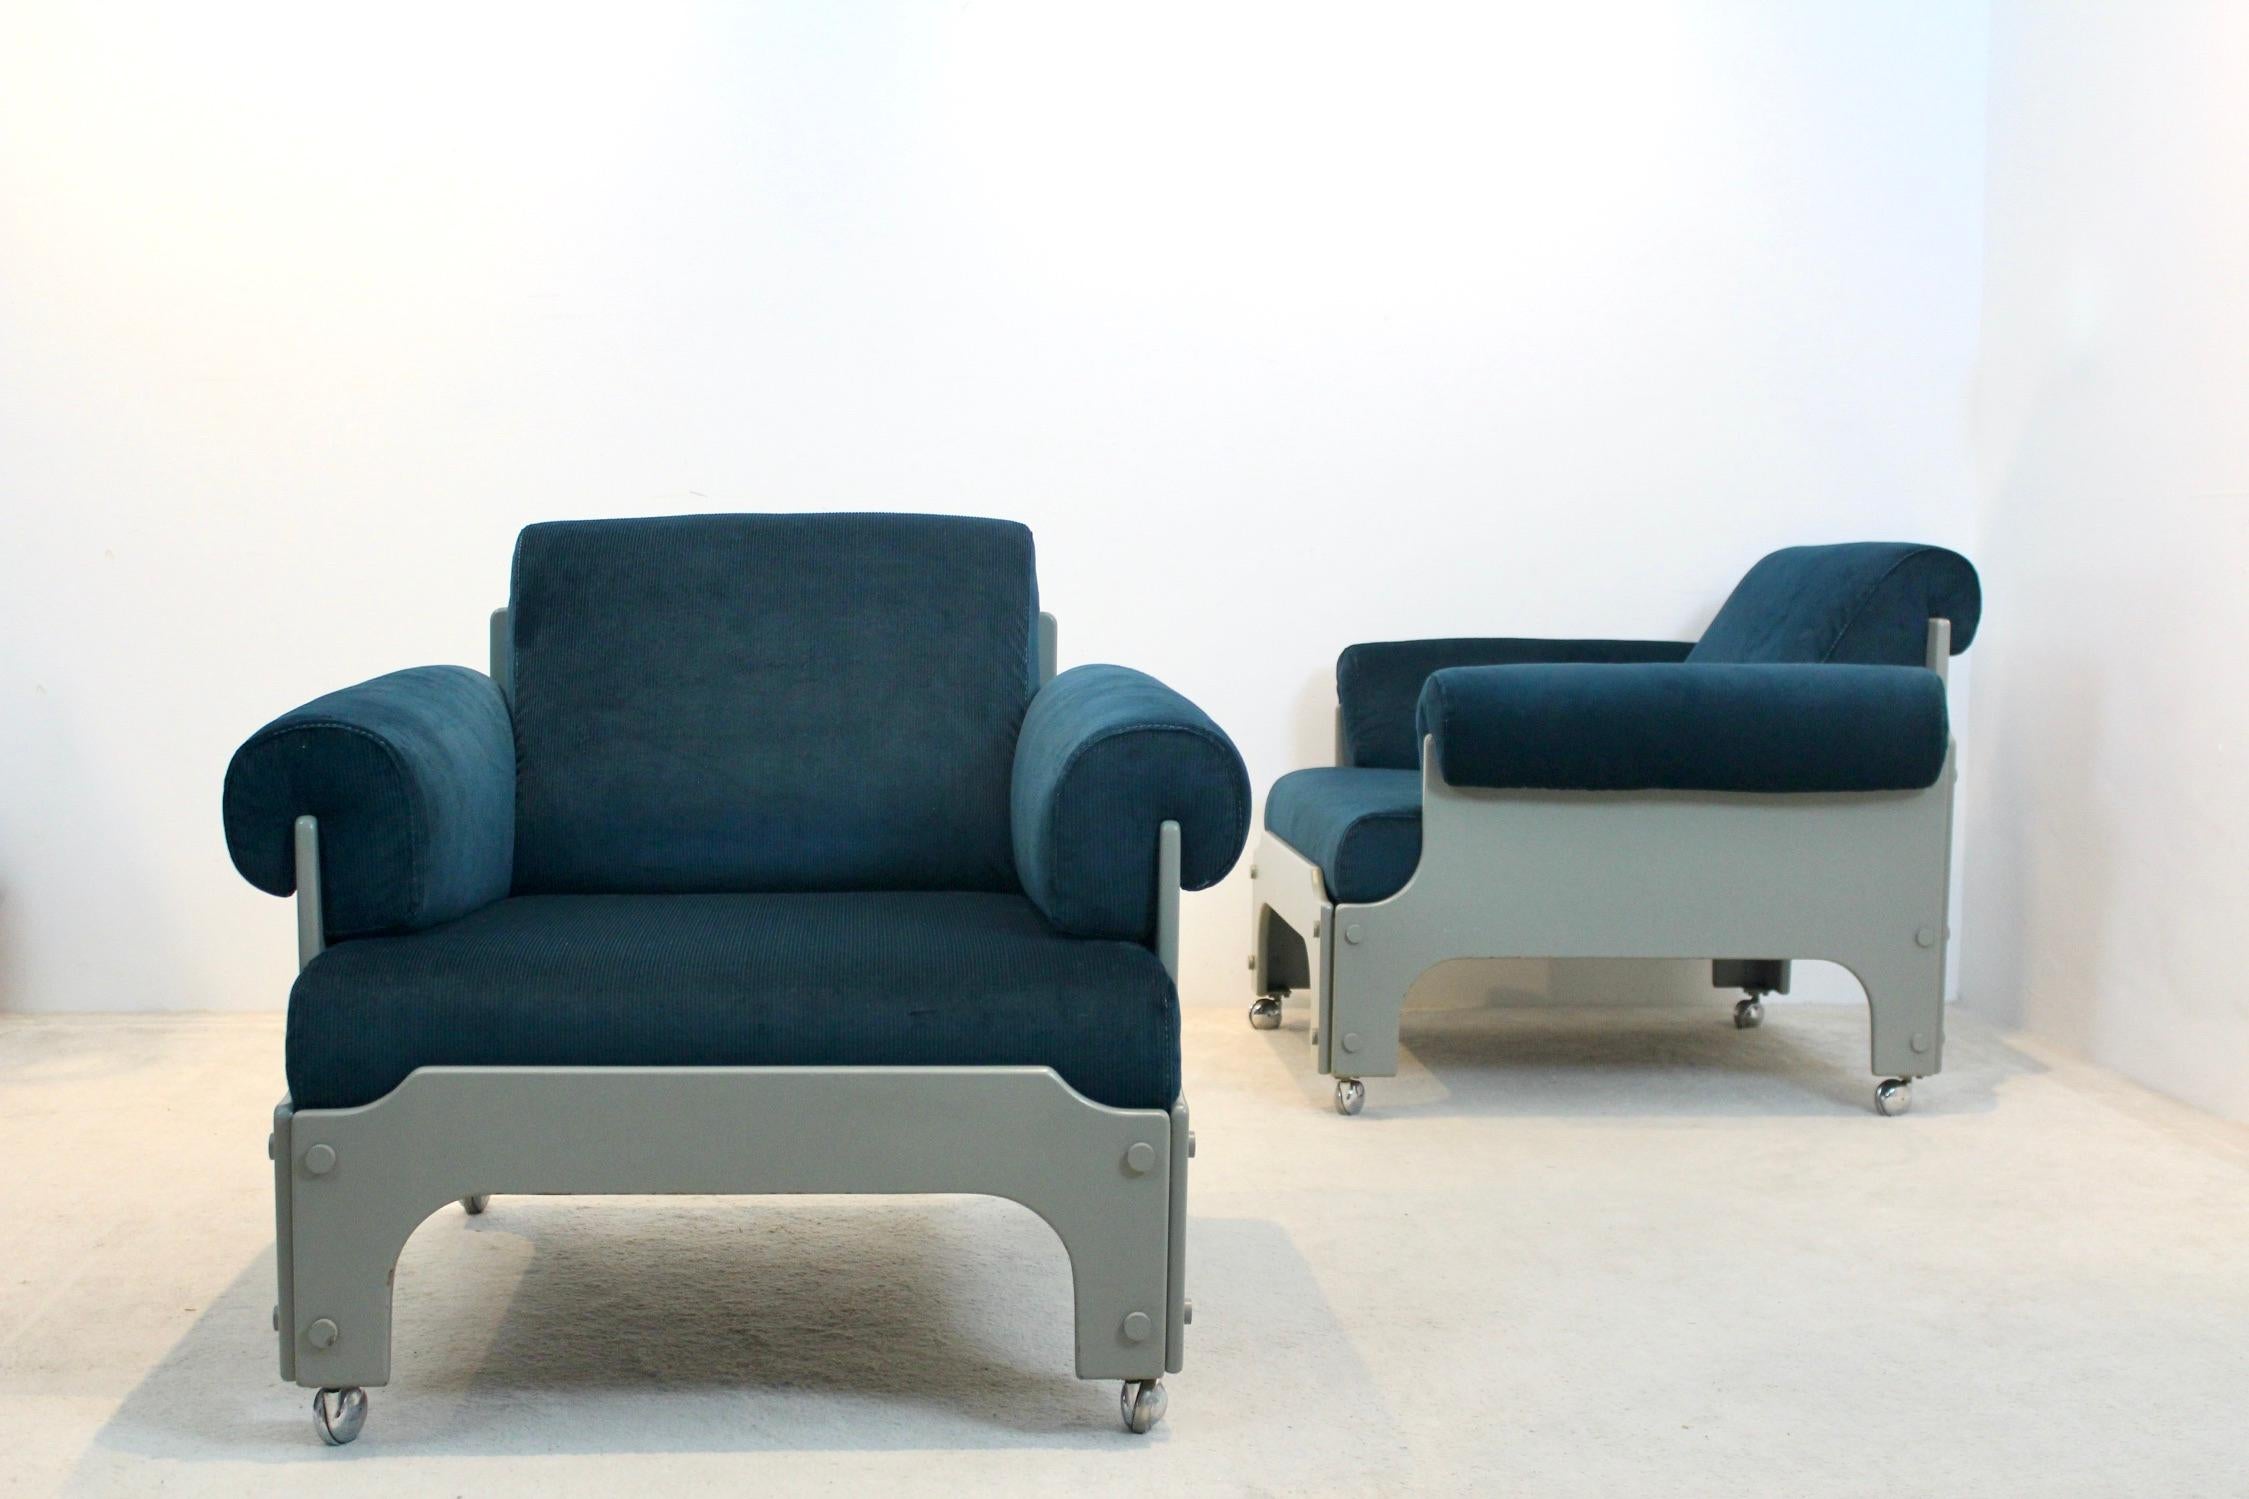 Very Rare SZ 85 Spectrum Easy Chairs by Jan Pieter Berghoef, 1968 In Good Condition For Sale In Voorburg, NL